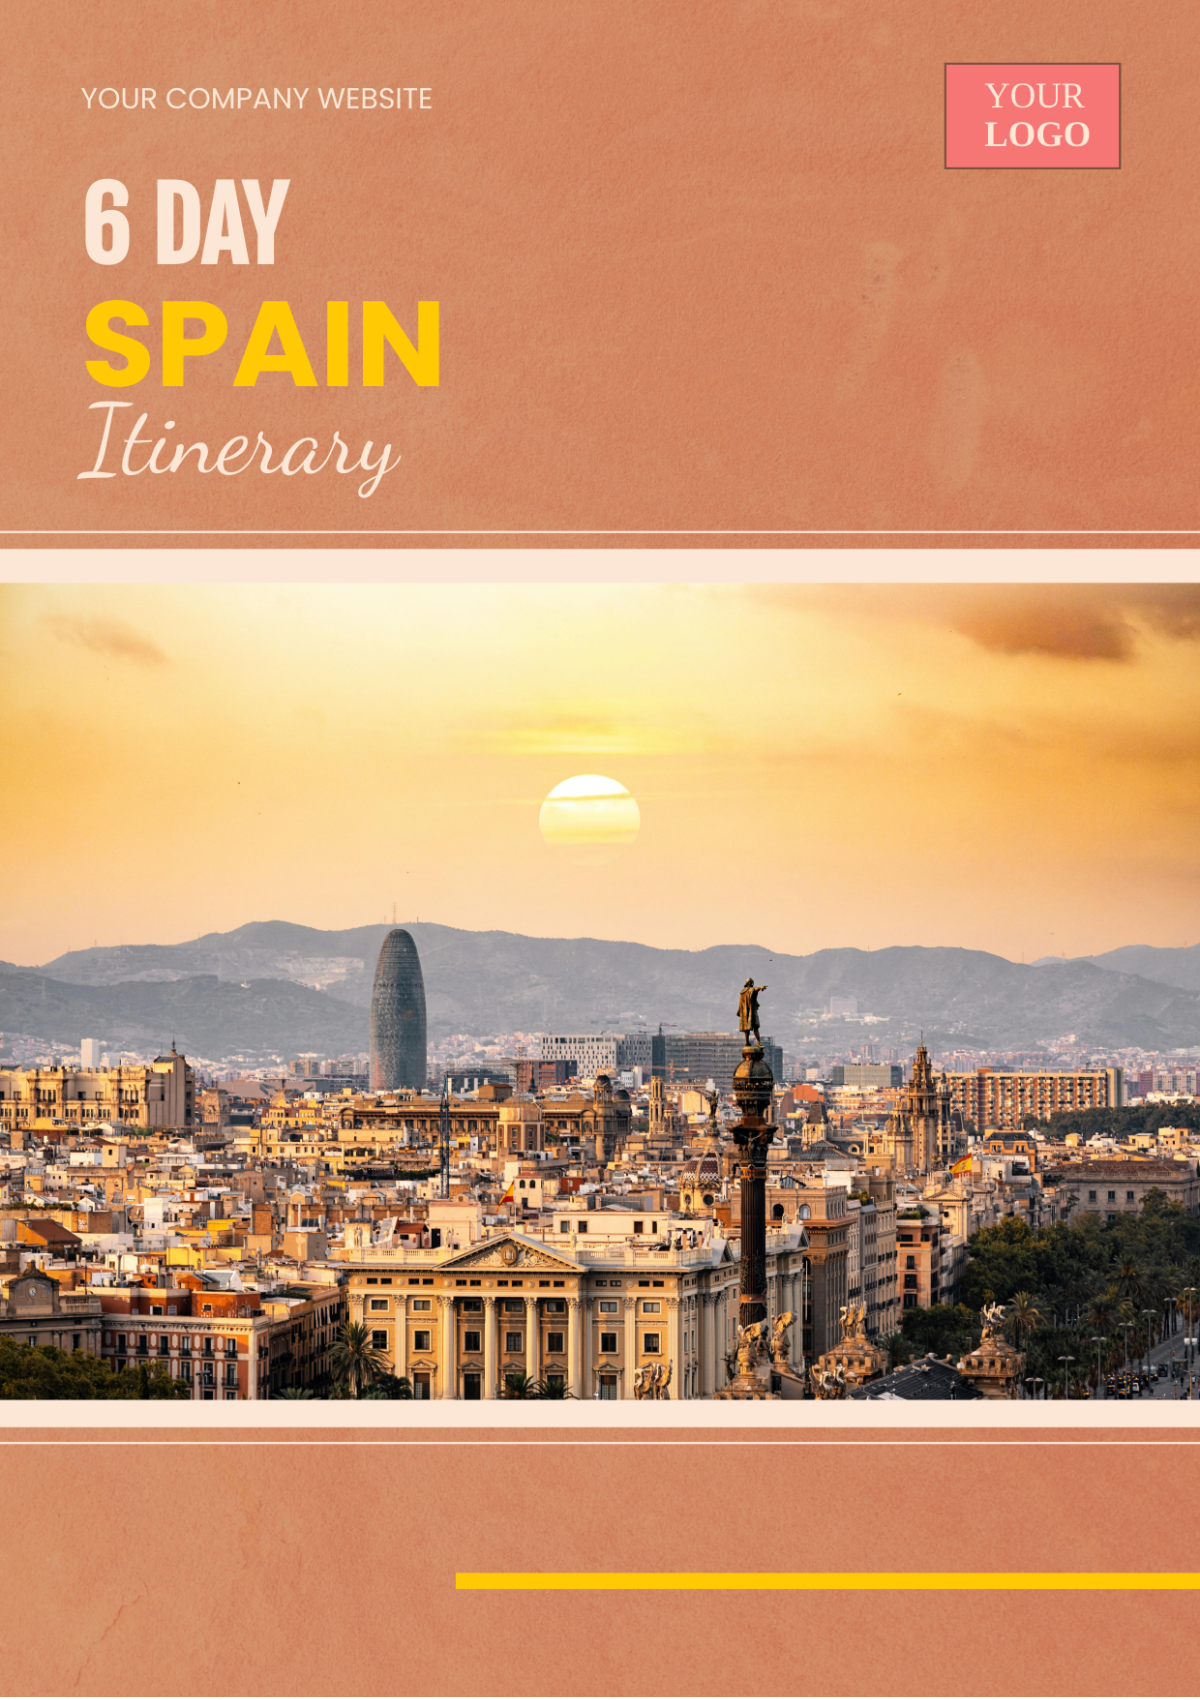 6 Day Spain Itinerary Template